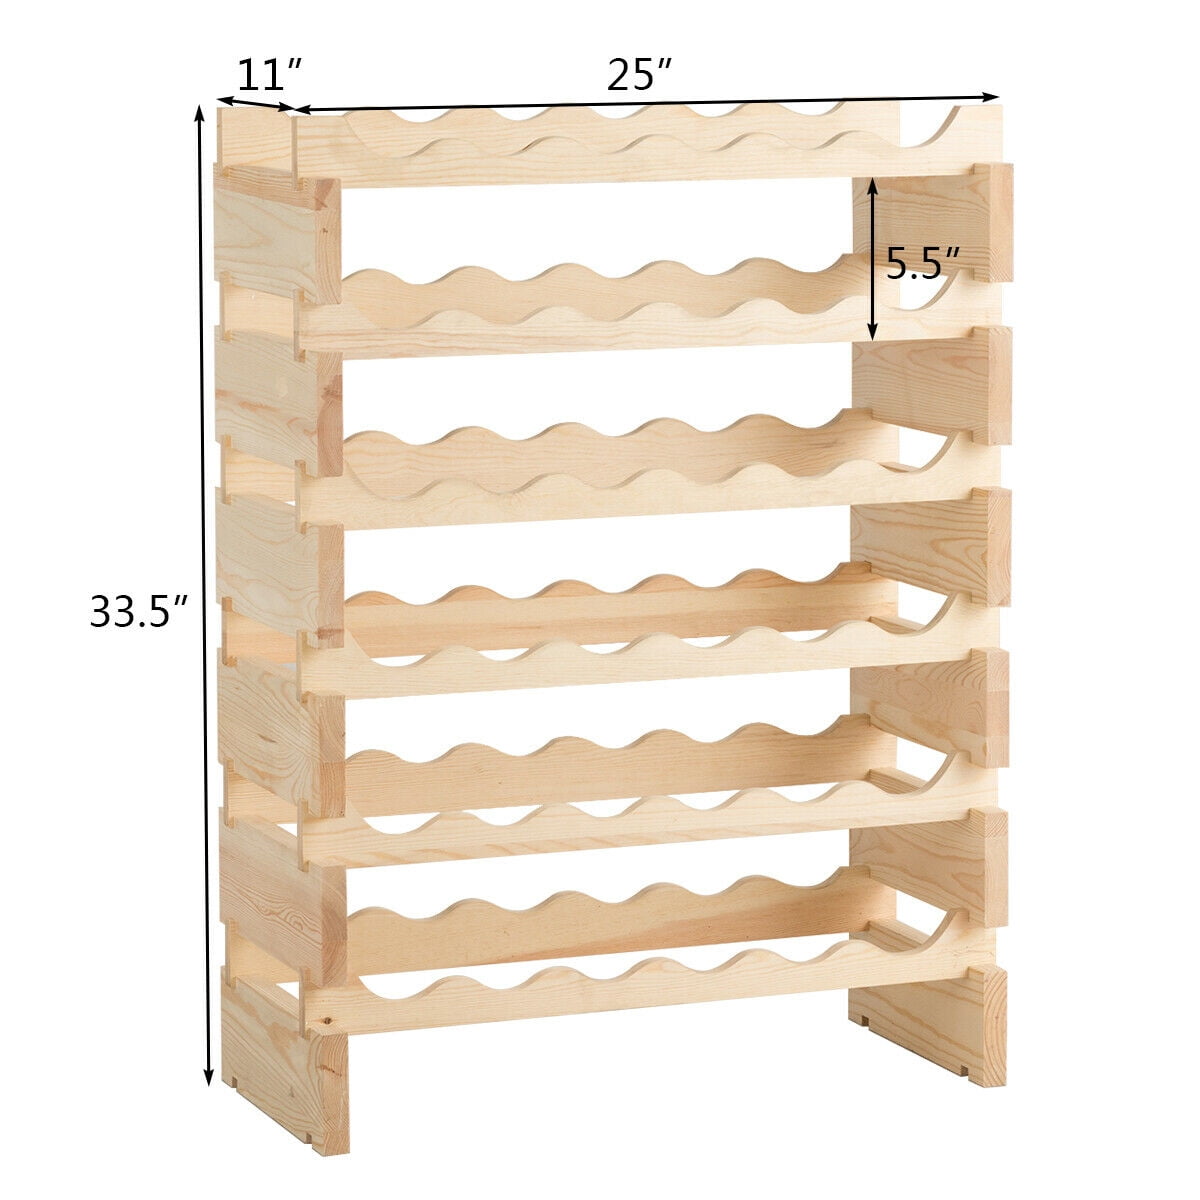 Thicker Wood 6/'x6/' wine display Wine Stand 36 Bottle Capacity Stackable Storage Wine Rack Wobble-Free